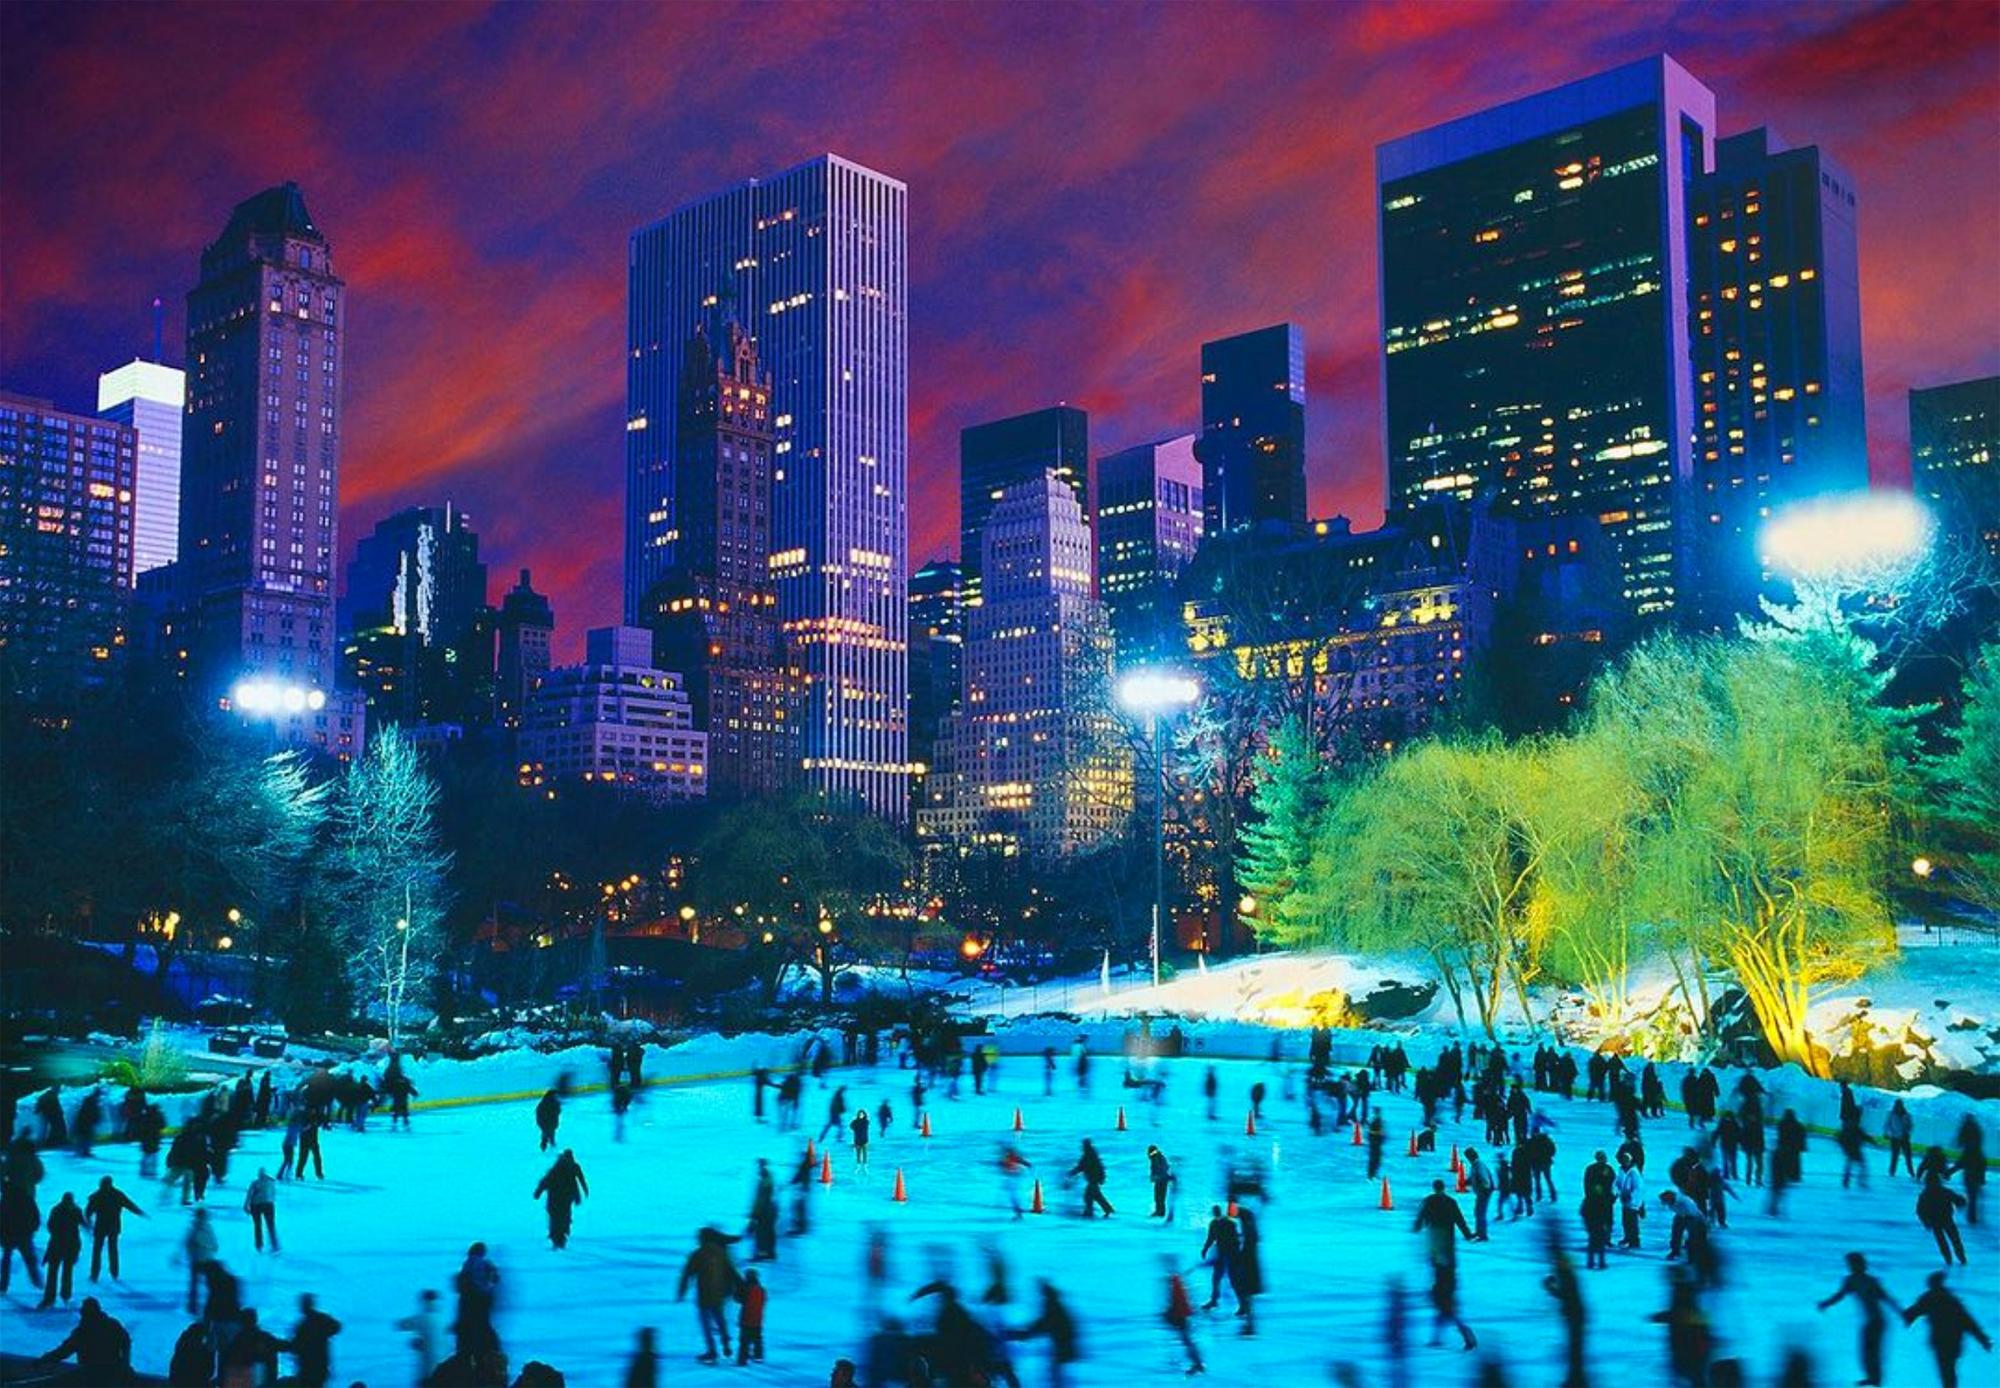 Mitchell Funk Landscape Photograph -  Central Park Ice Skaters at Night  Purple Sky in  New York City